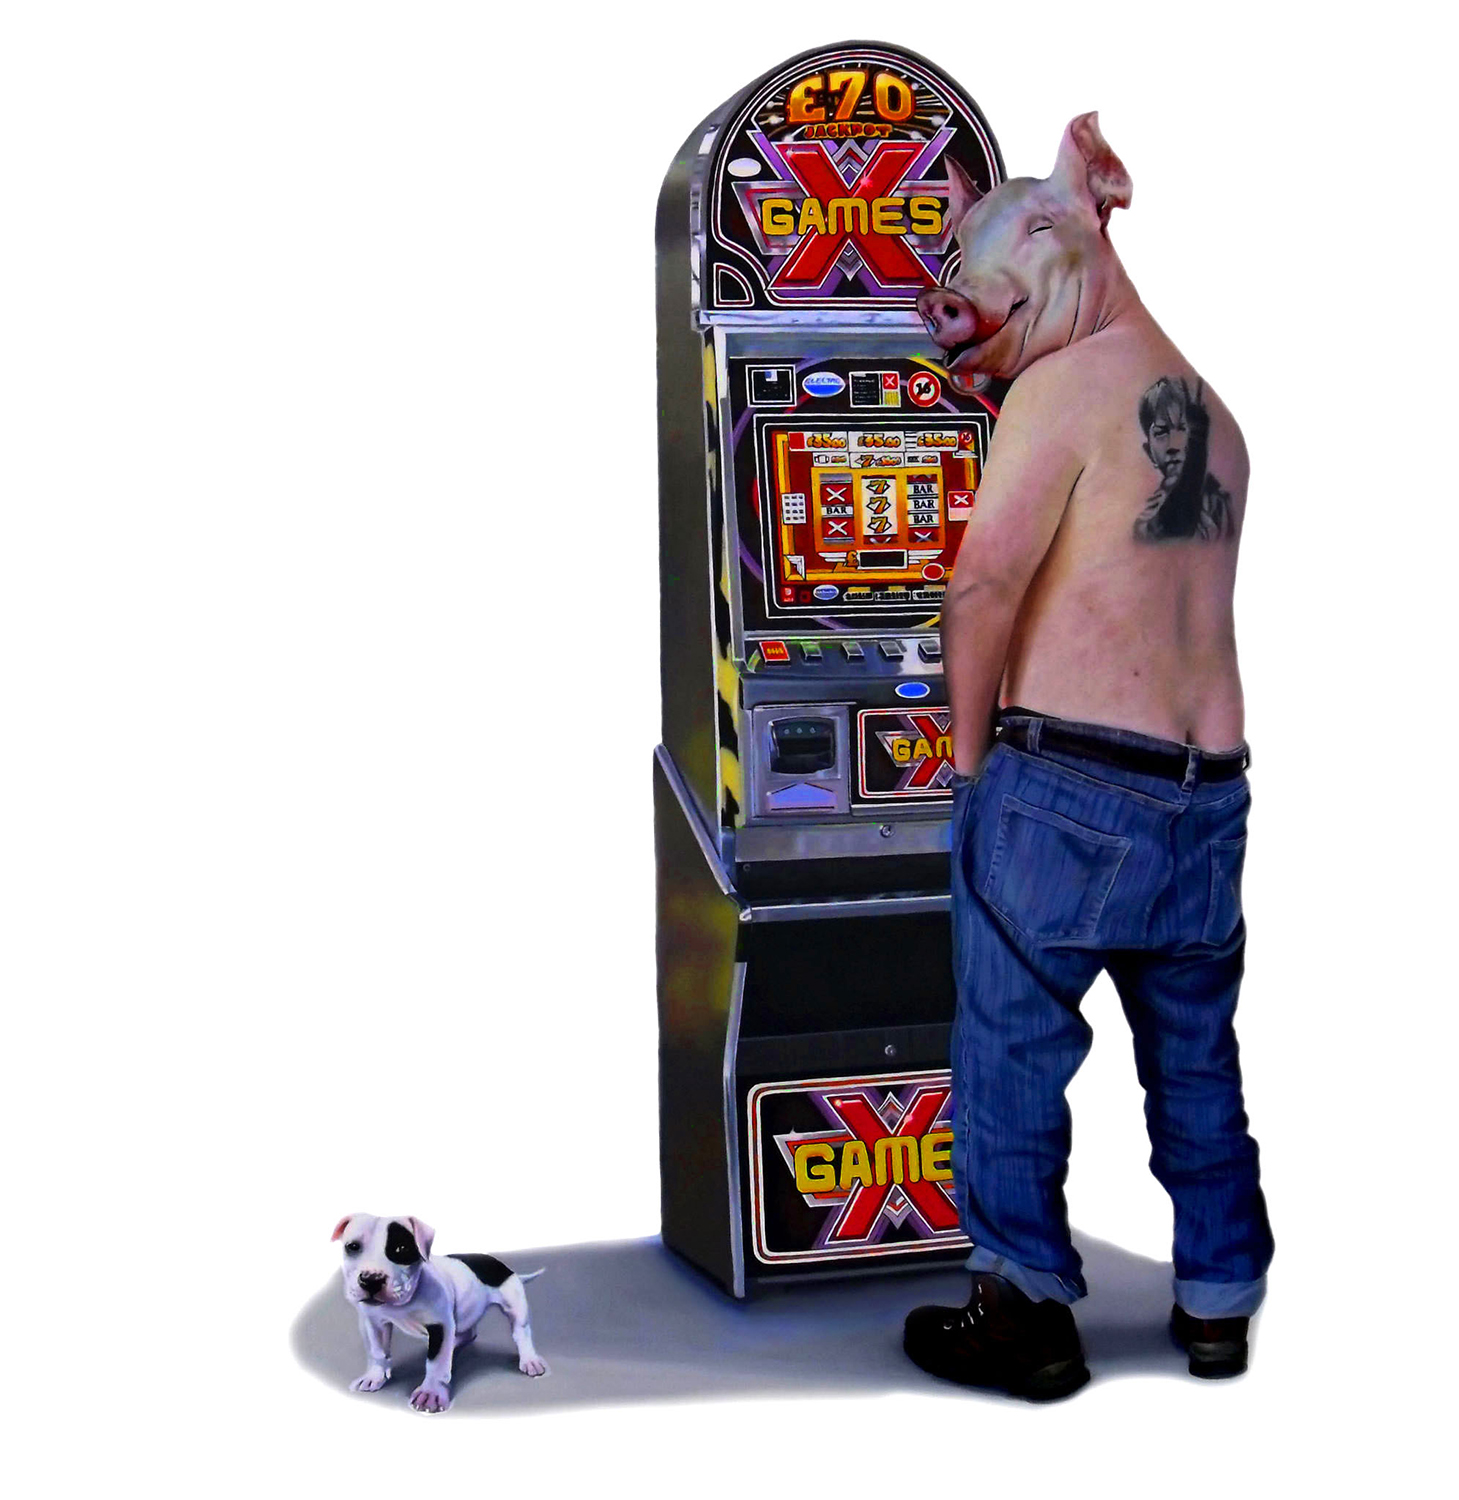 a man with a pig head and a small dog in front of a slot machine - Tony South - Blackpool